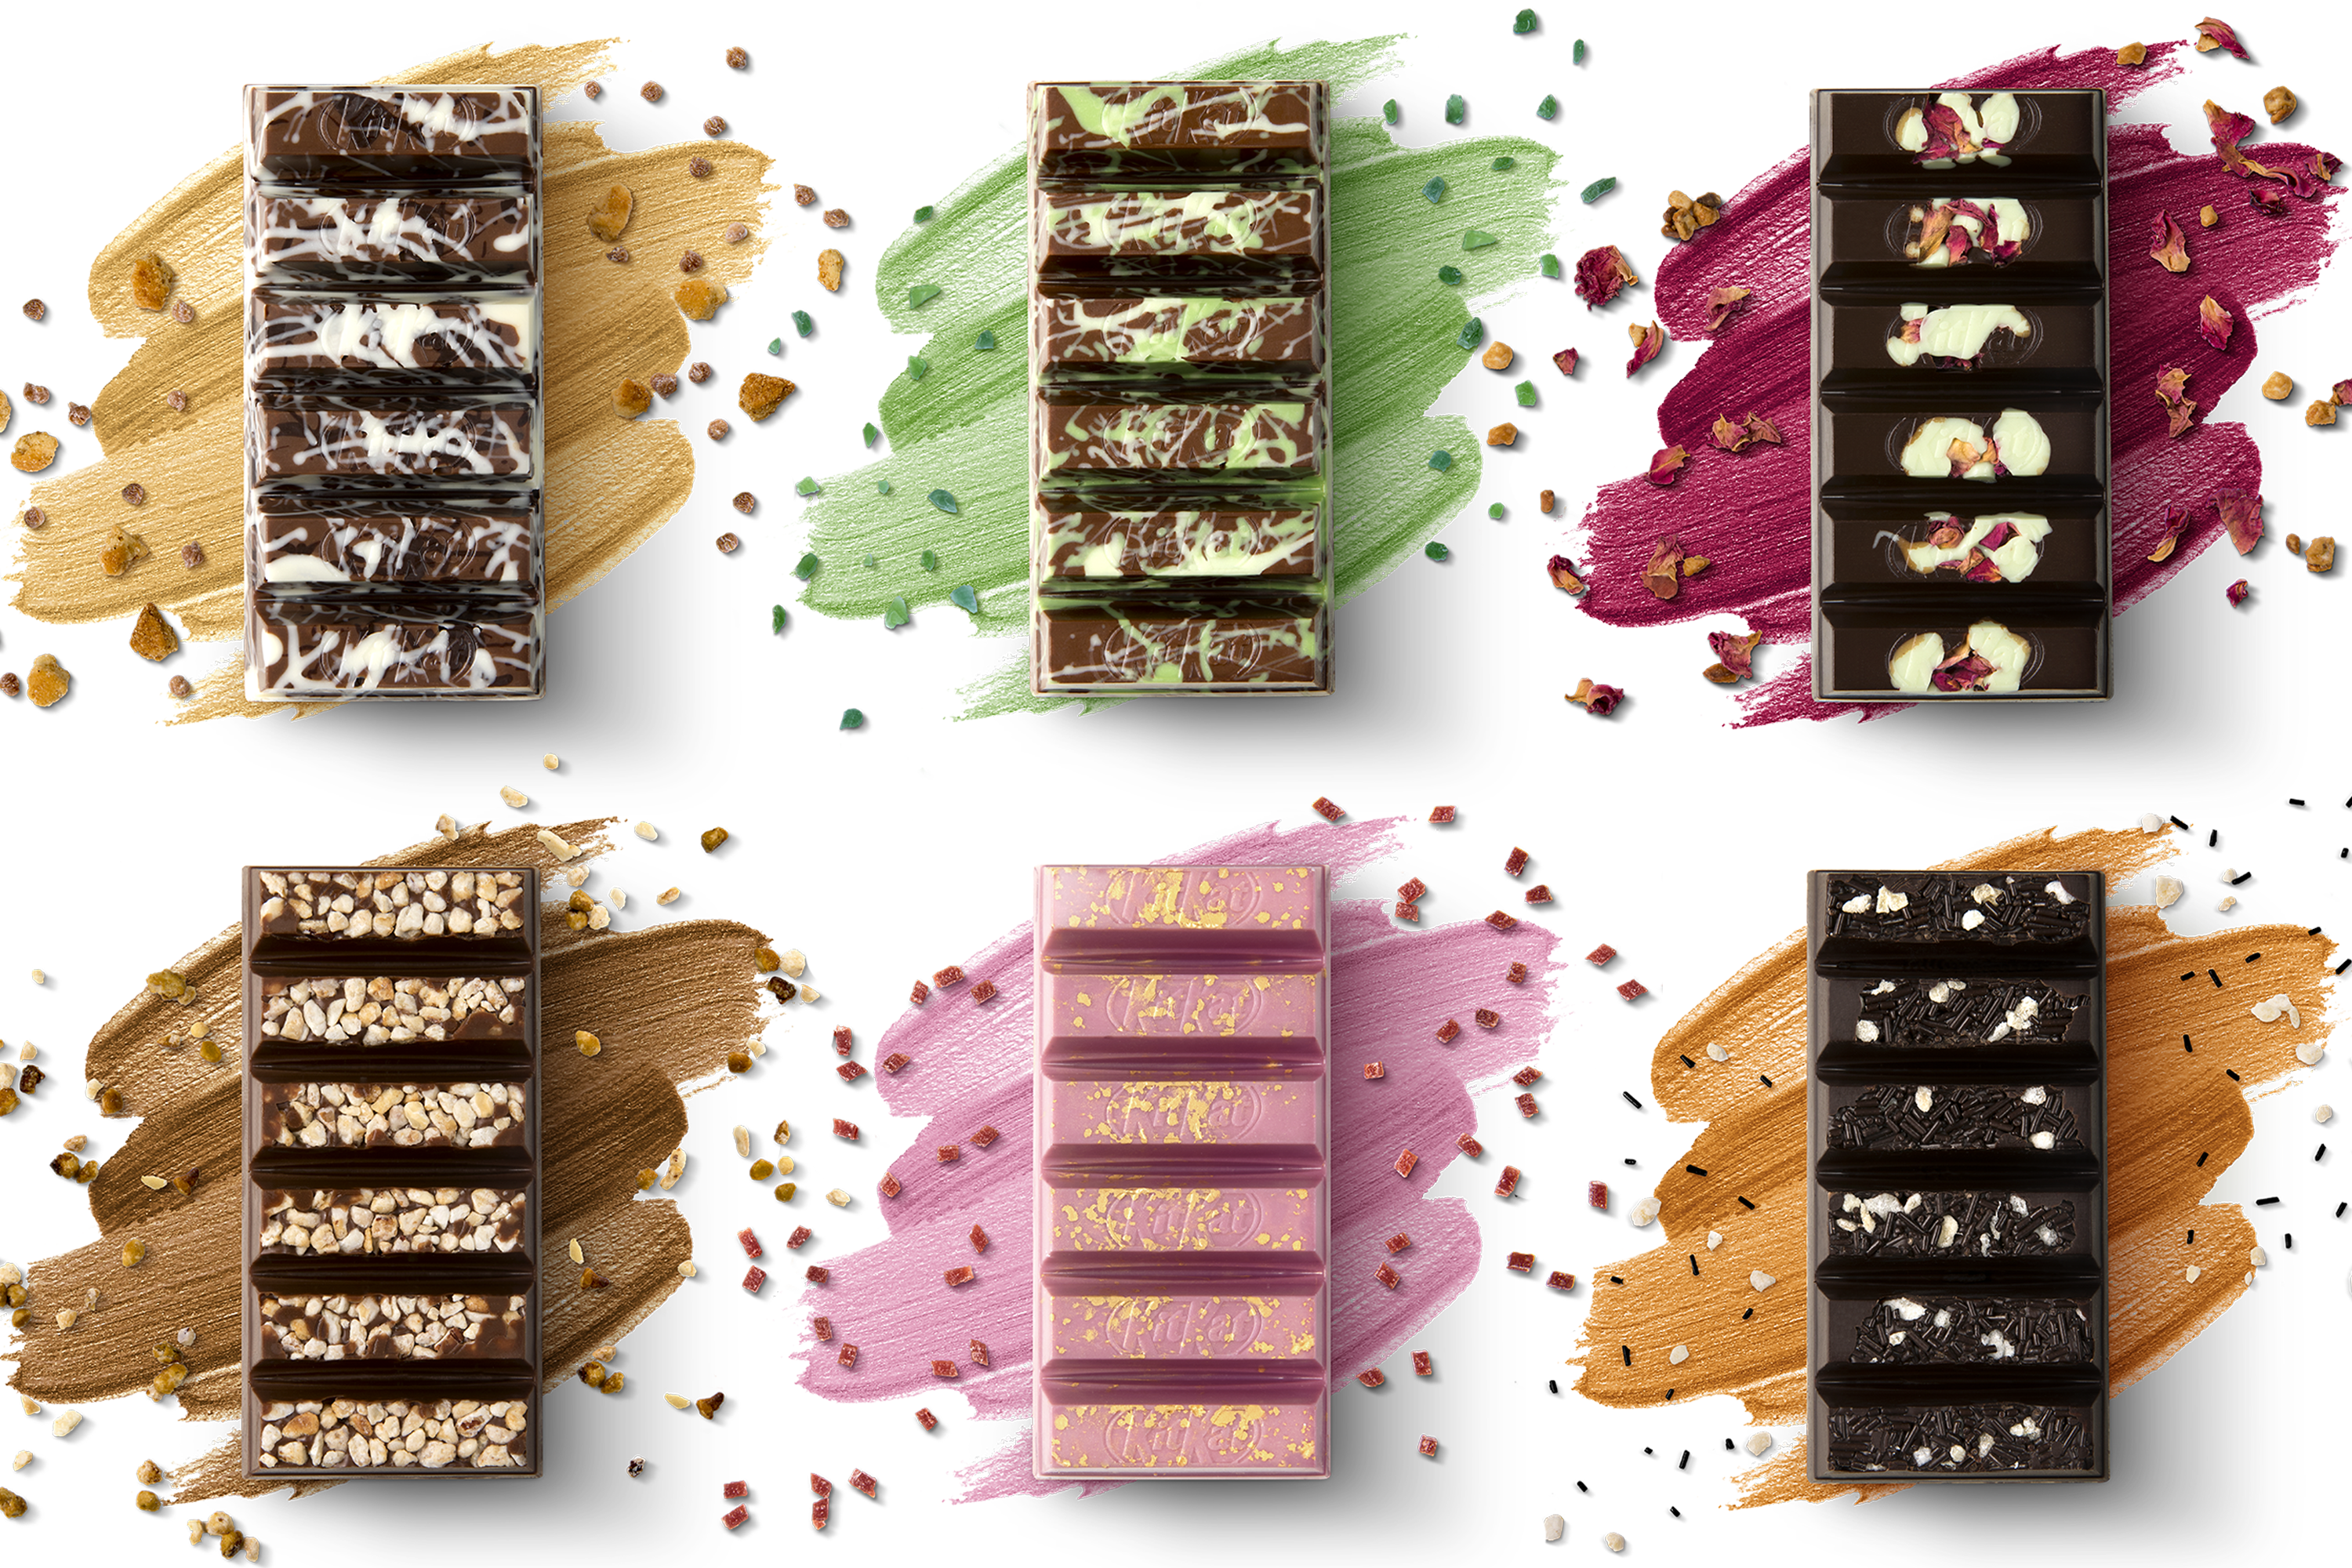 KitKat Is Going Luxury and These $17 Bars Actually Sound Delightful